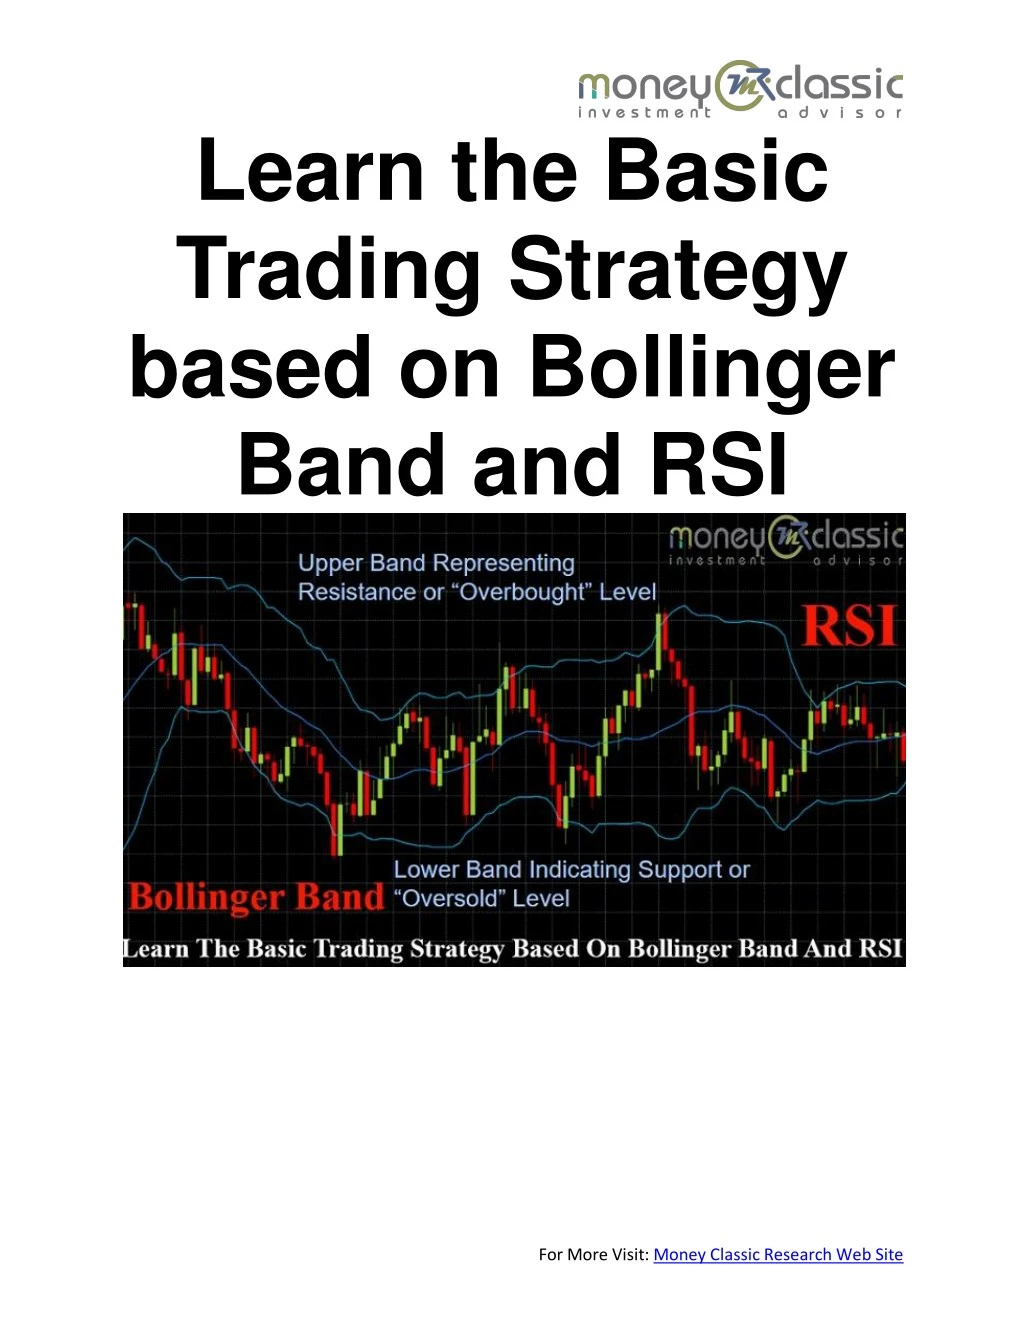 learn the basic trading strategy based